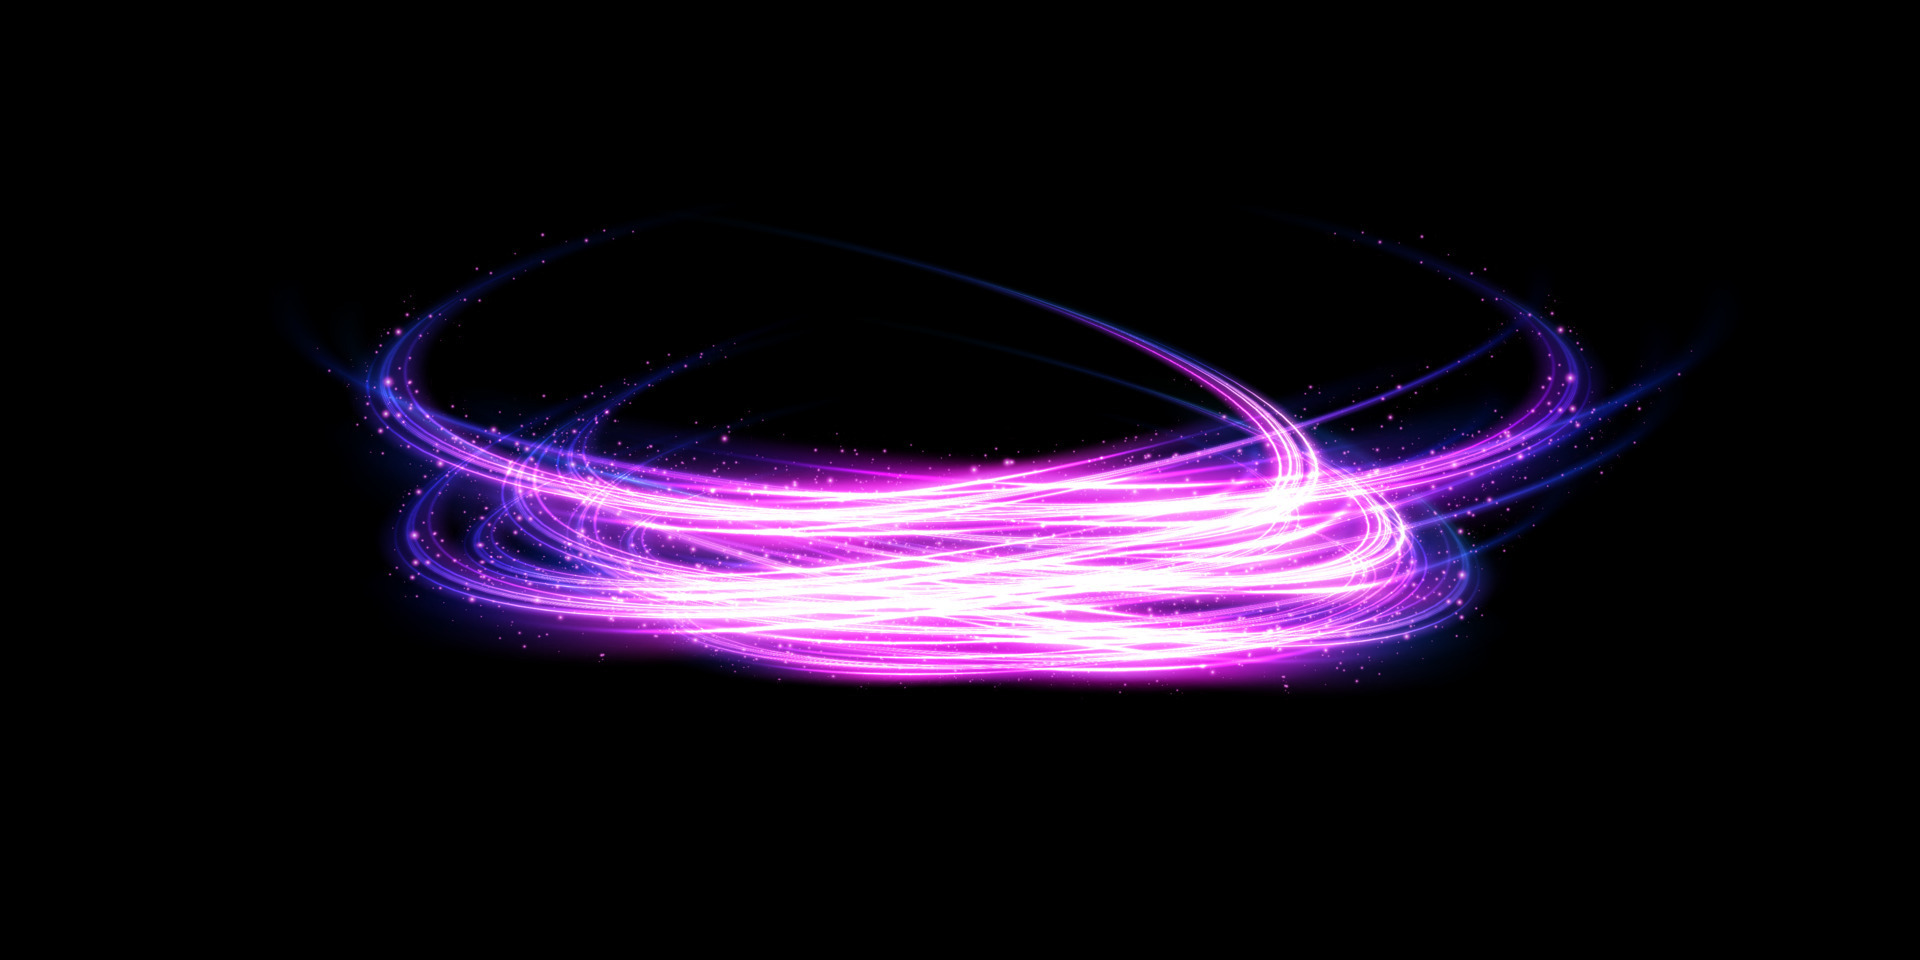 https://static.vecteezy.com/system/resources/previews/021/673/377/original/abstract-light-lines-of-movement-and-speed-with-purple-color-glitters-light-everyday-glowing-effect-semicircular-wave-light-trail-curve-swirl-vector.jpg